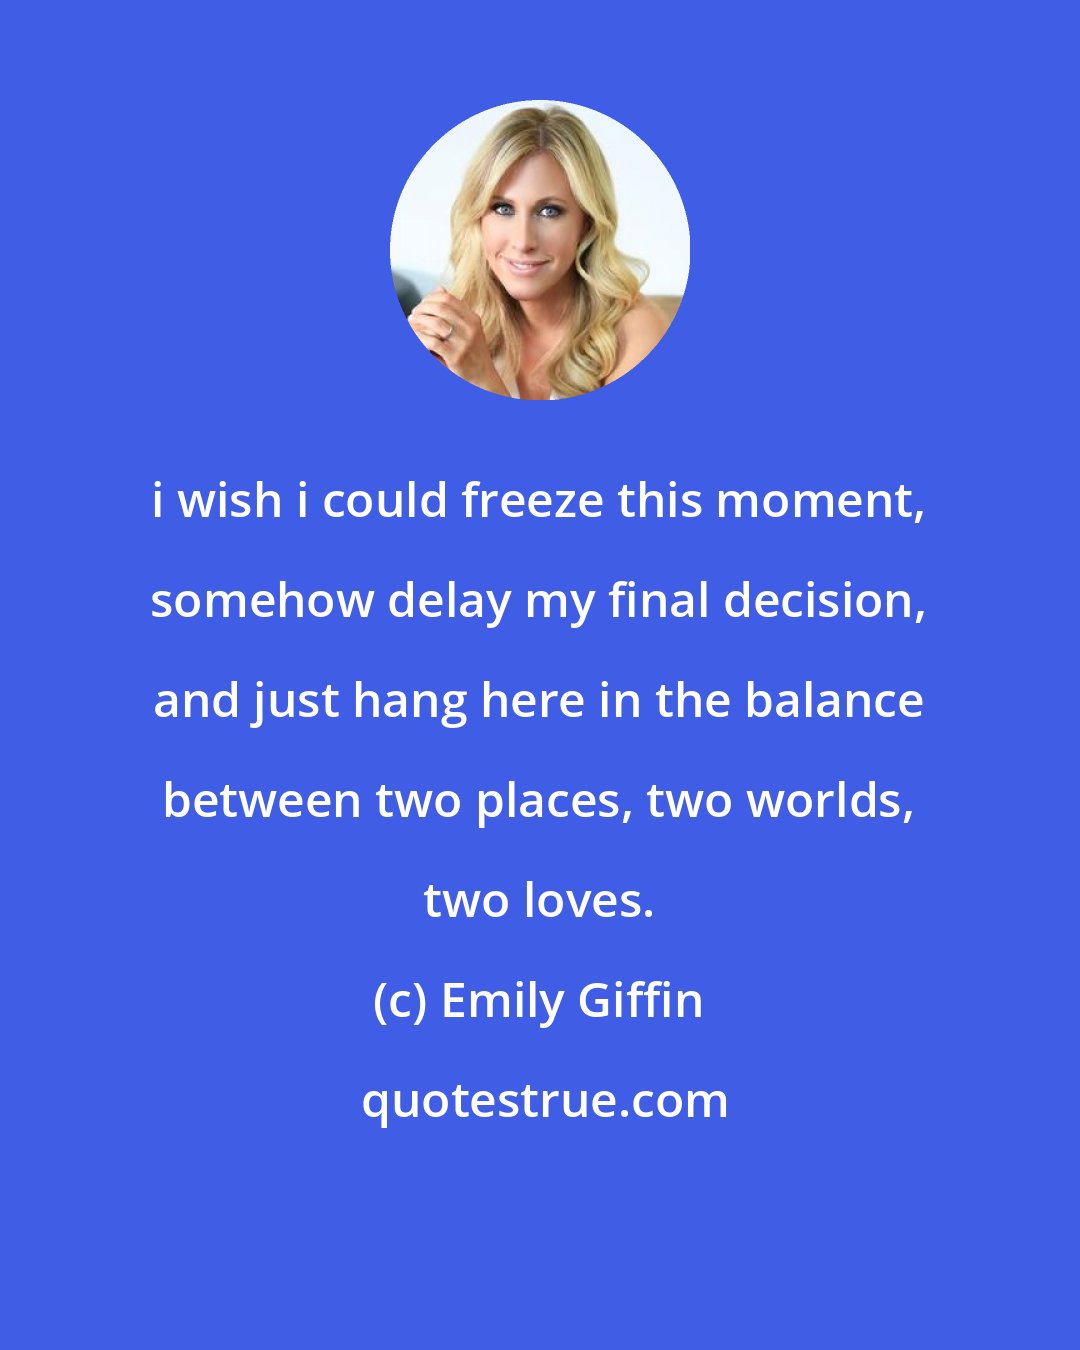 Emily Giffin: i wish i could freeze this moment, somehow delay my final decision, and just hang here in the balance between two places, two worlds, two loves.